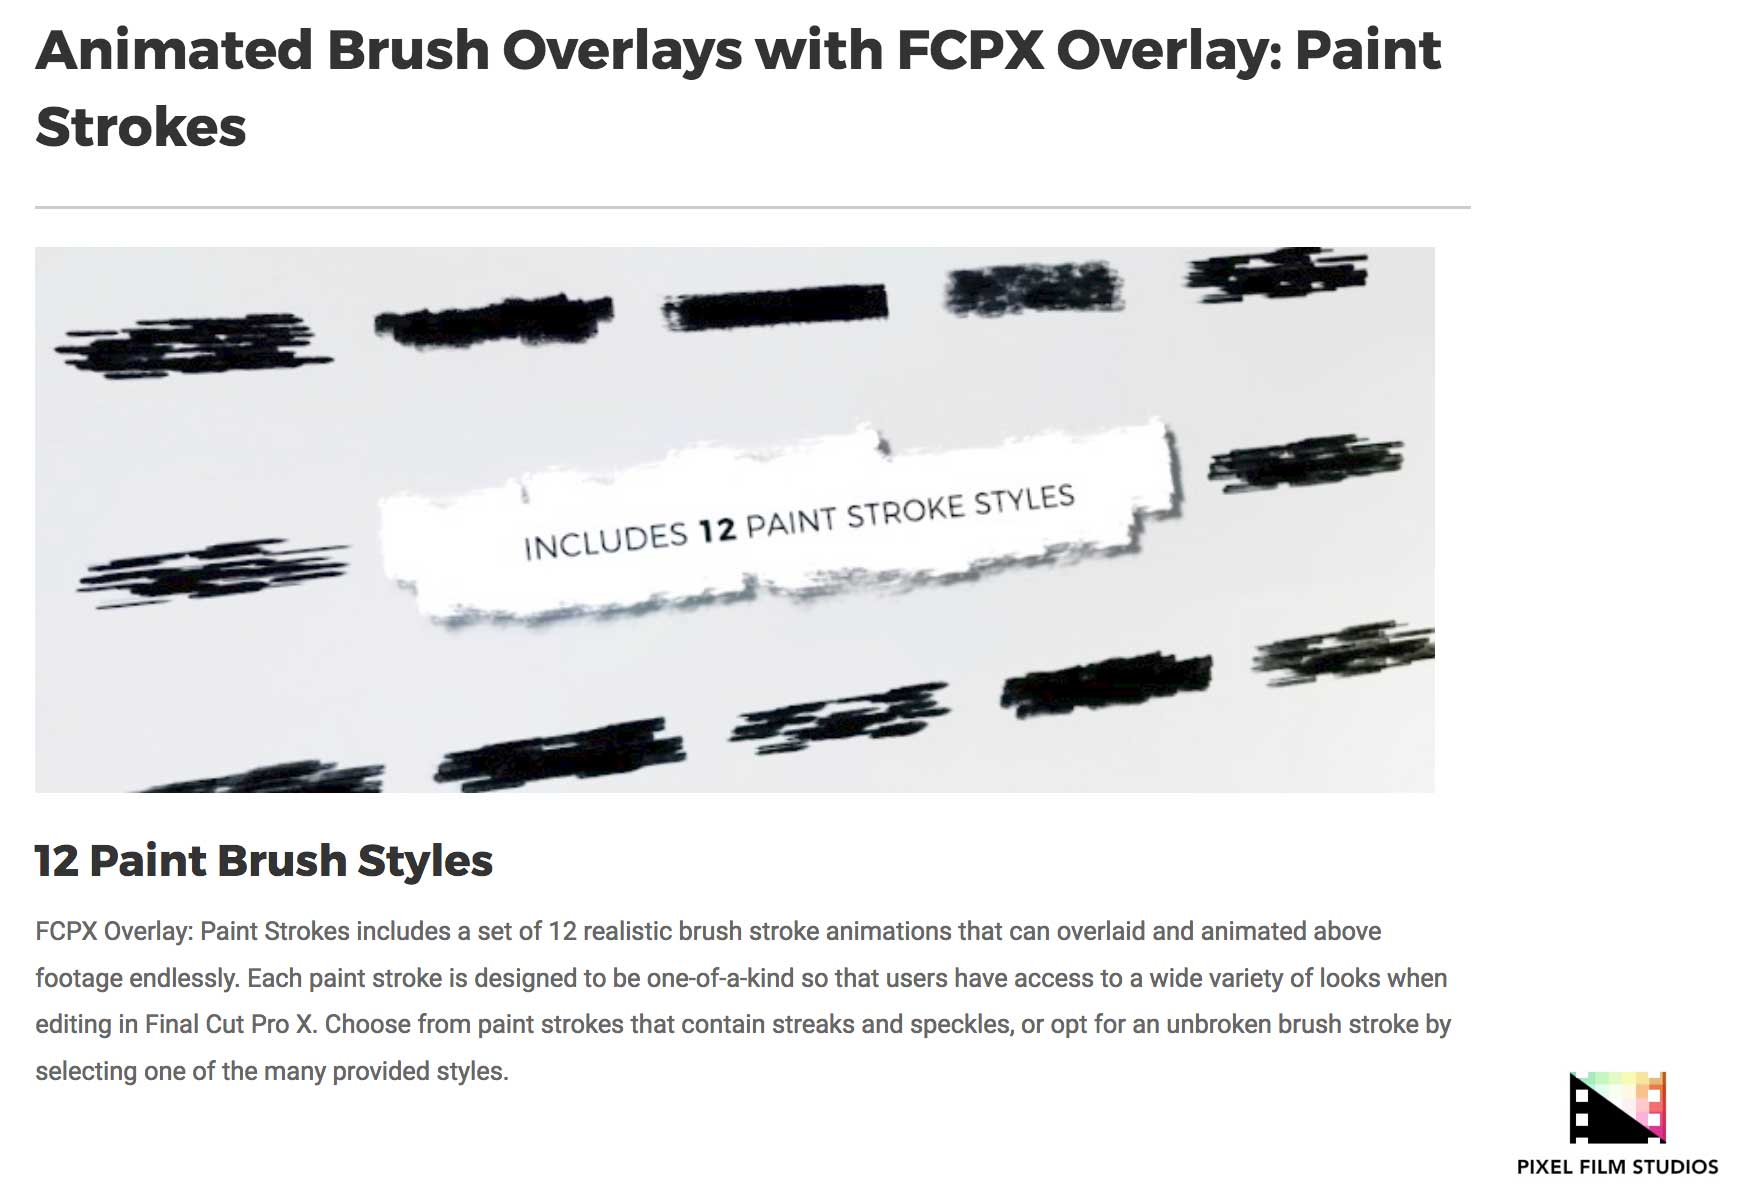 FCPX Overlay Paint Strokes - Pixel Film Studios - FCPX Plugins